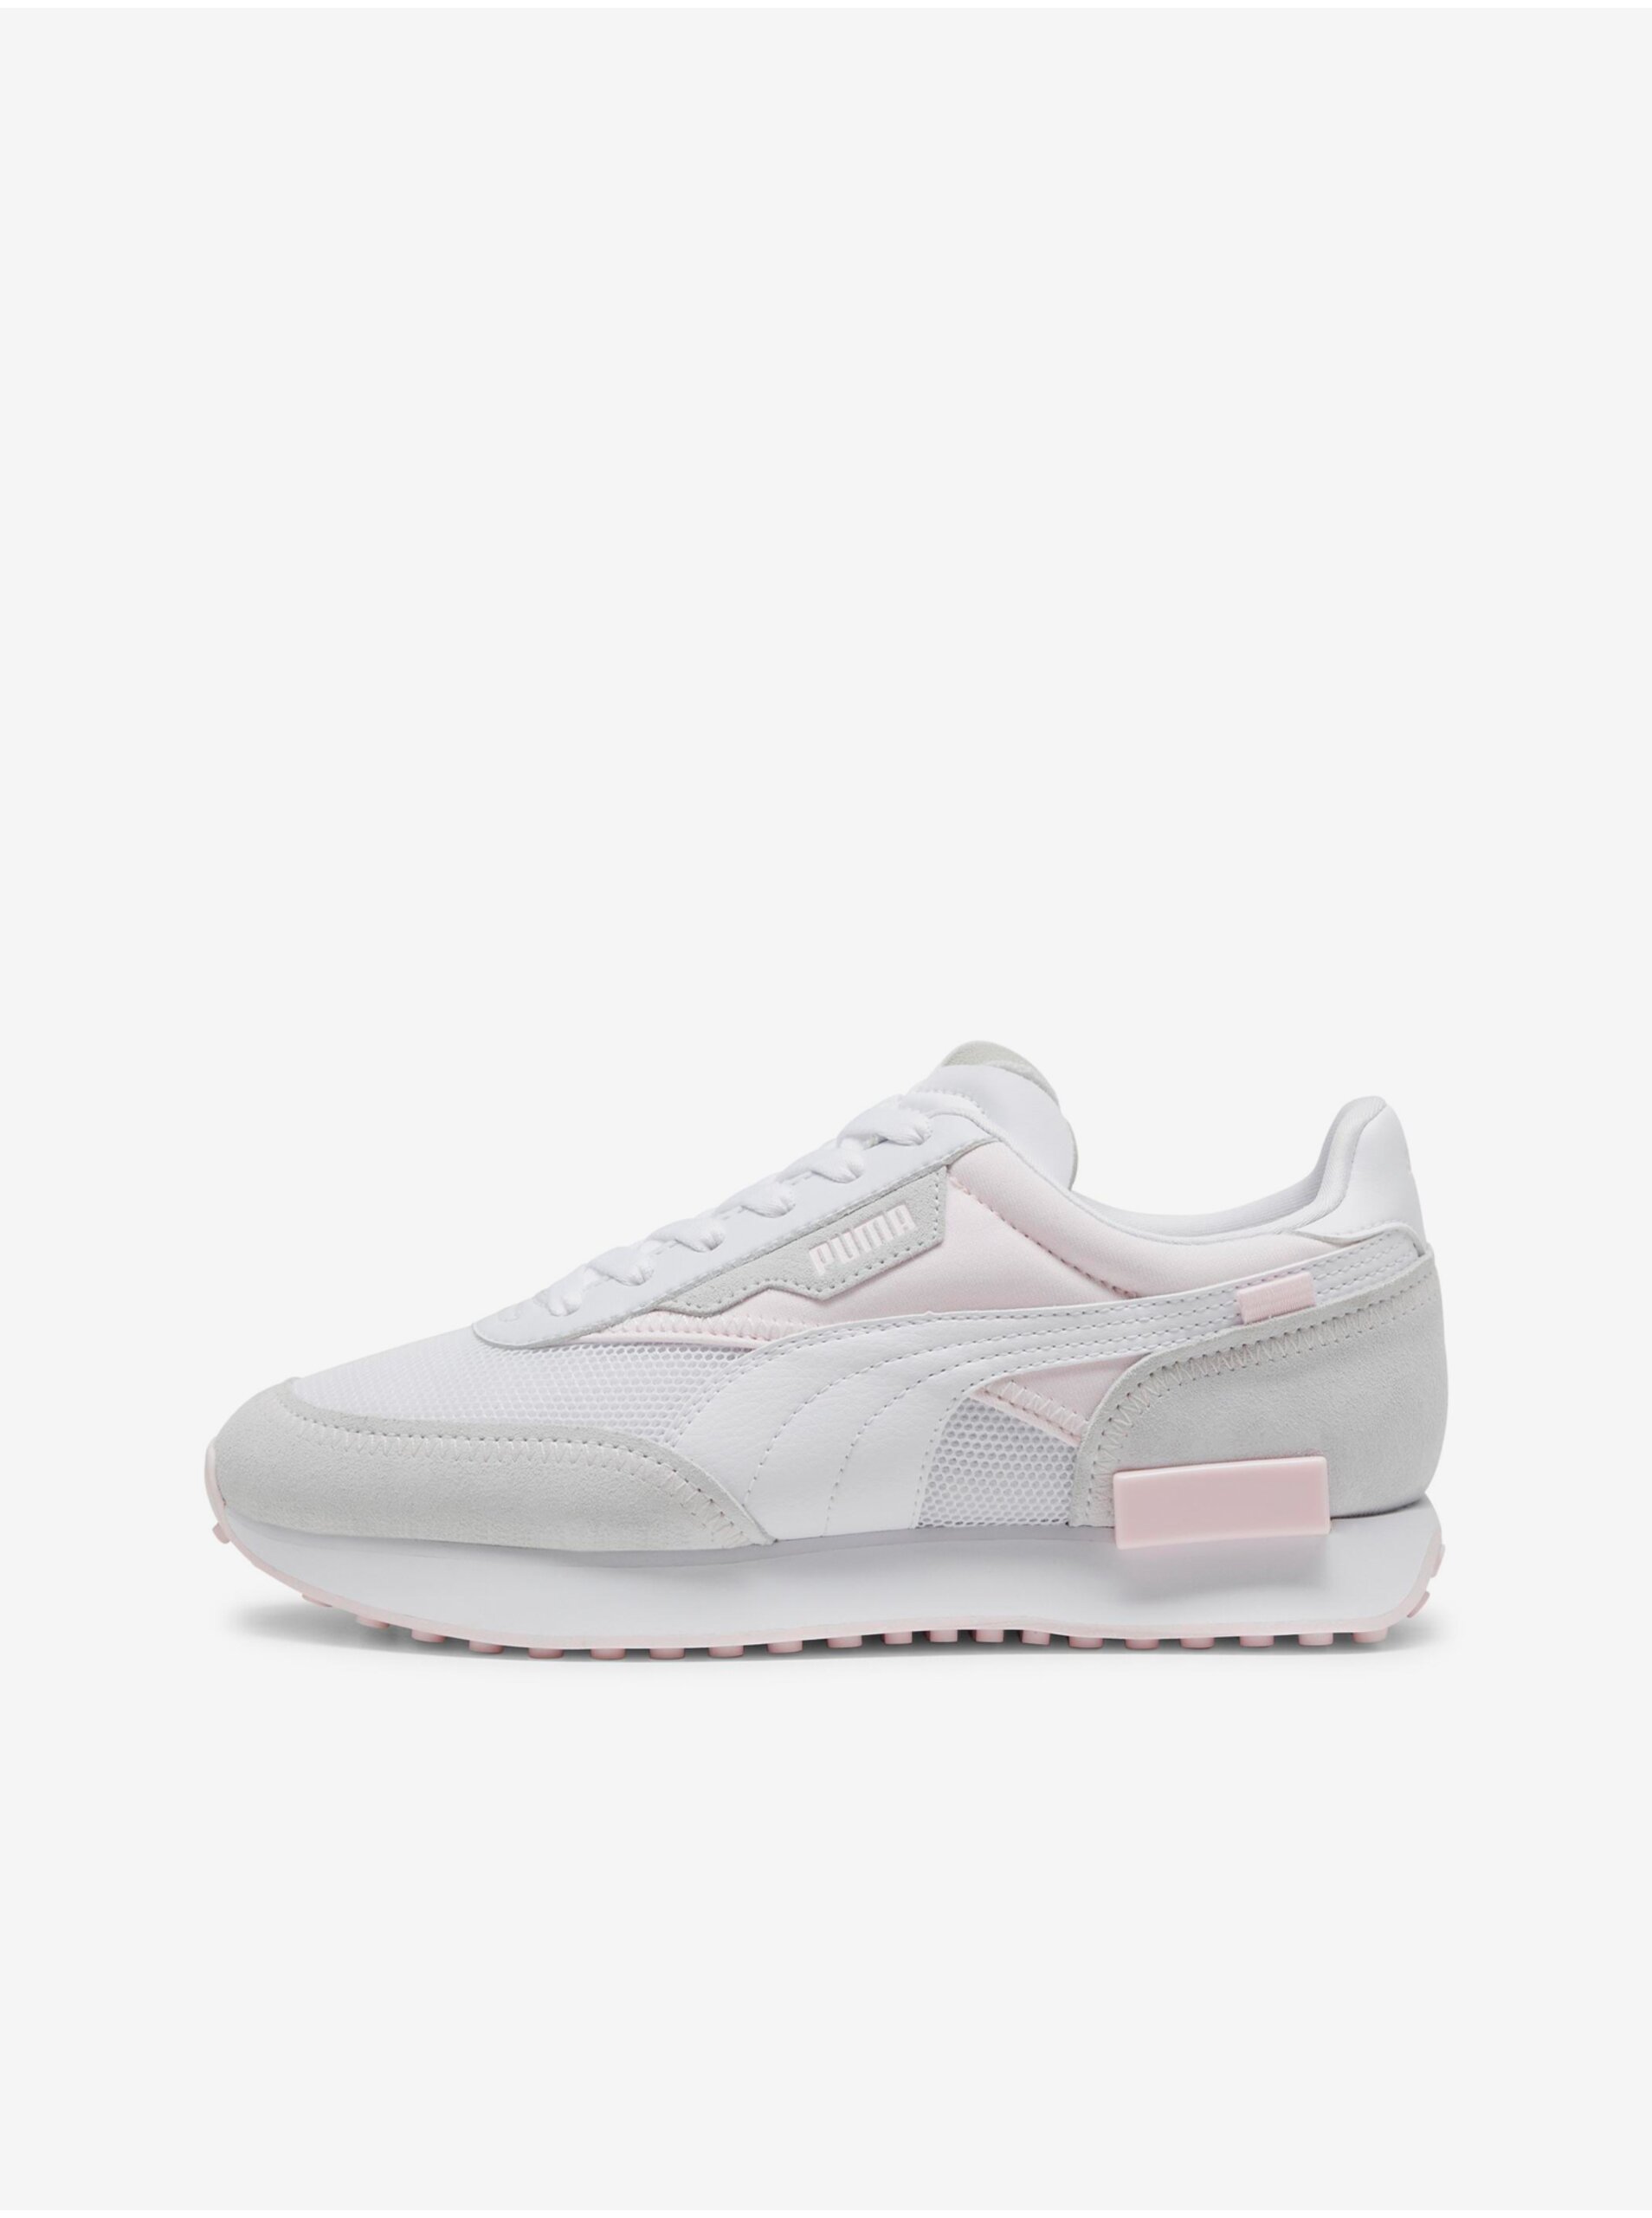 Puma Future Rider Q Women's Pink and White Sneakers with Leather Details - Women's